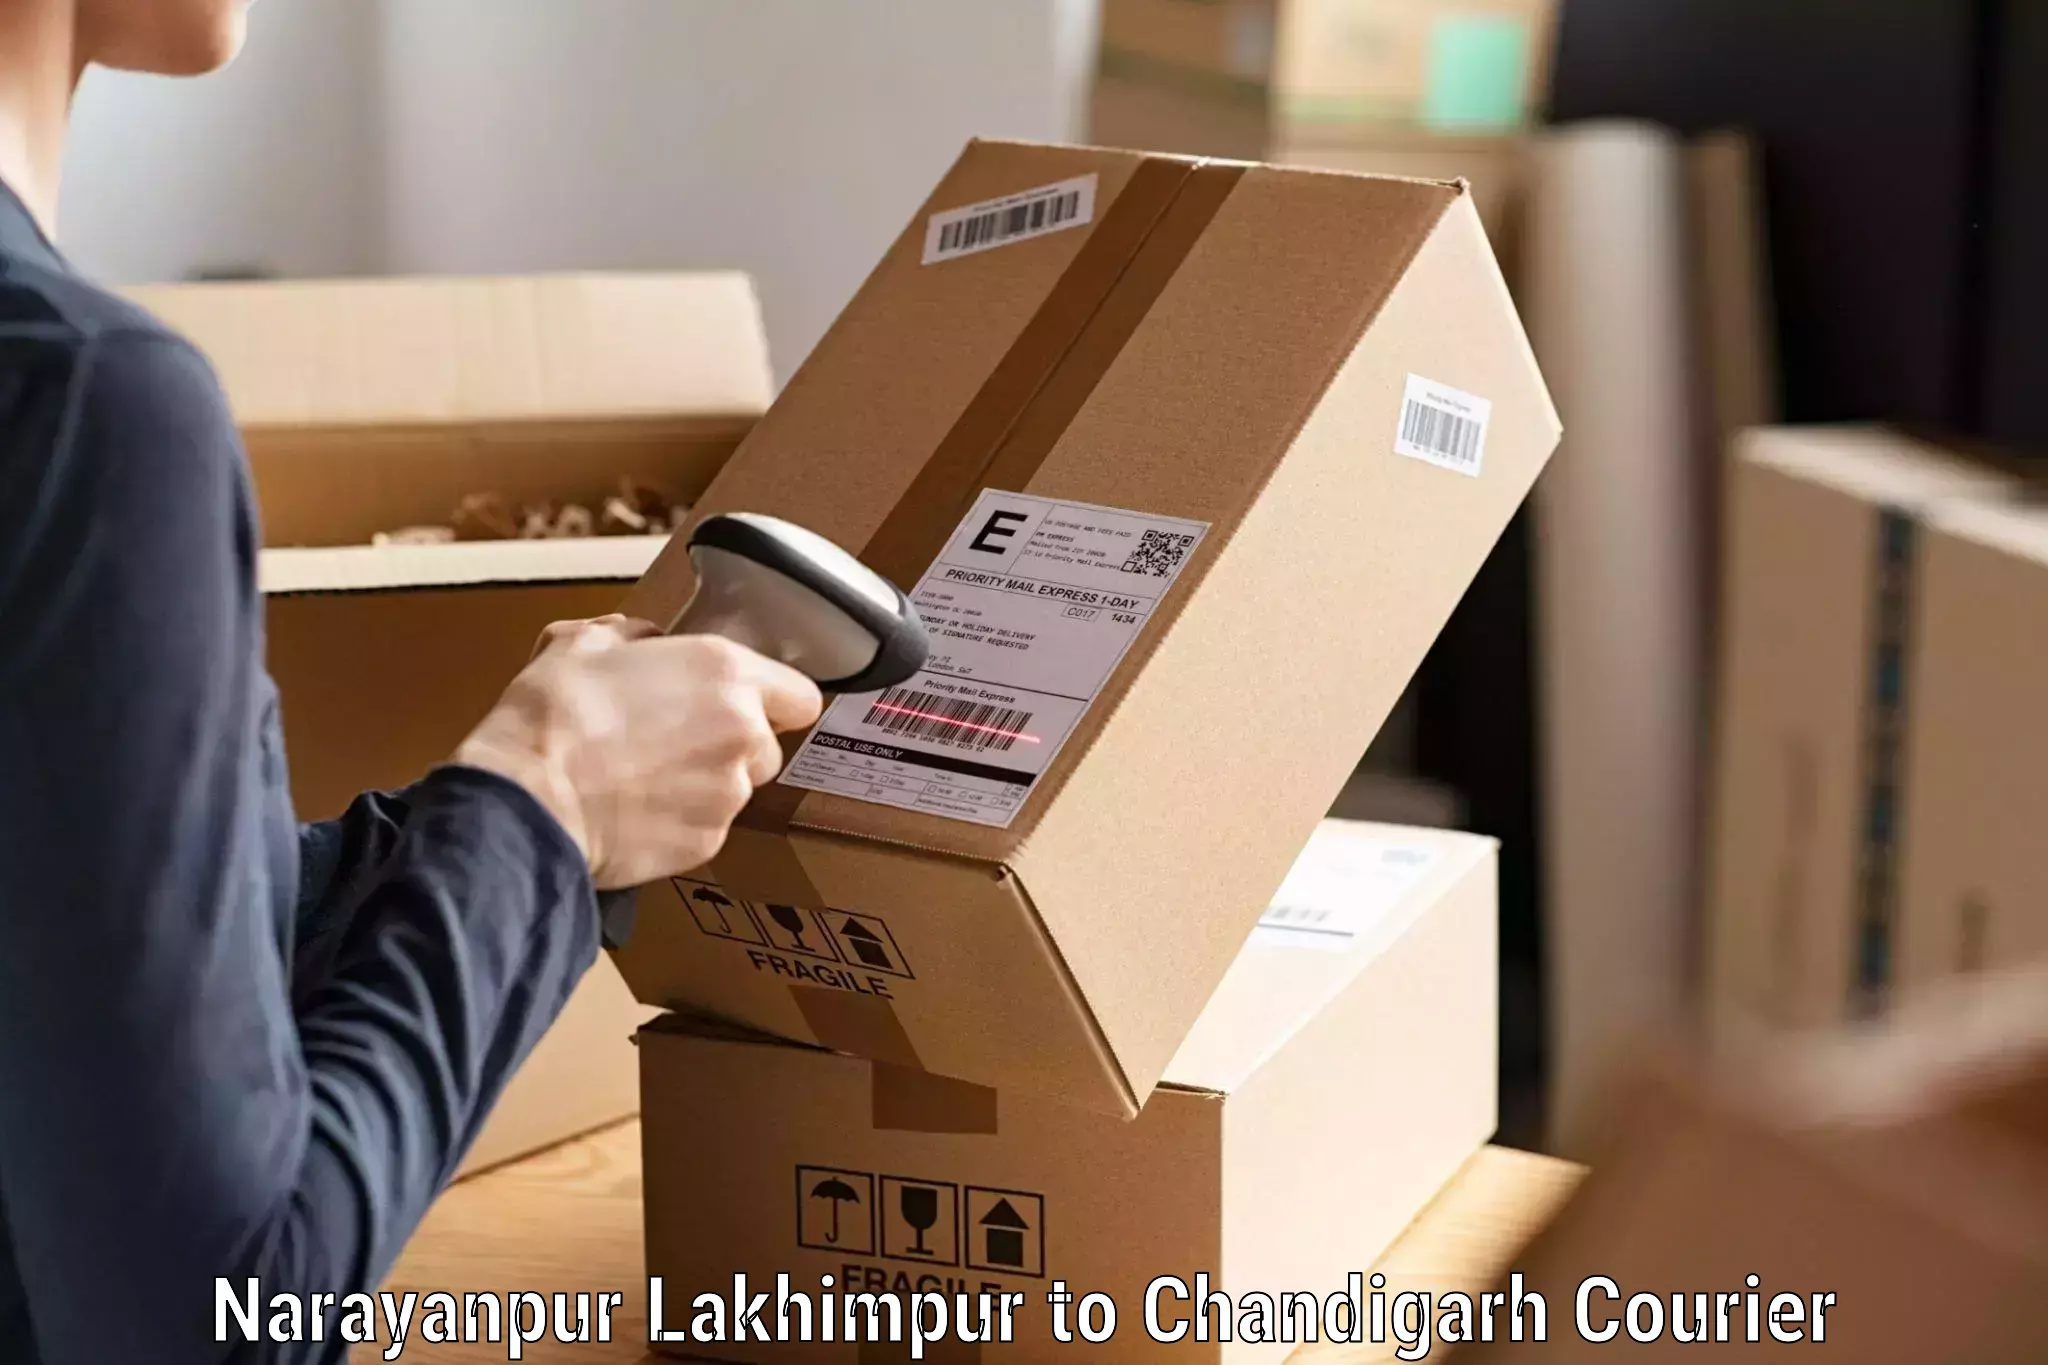 User-friendly courier app Narayanpur Lakhimpur to Chandigarh